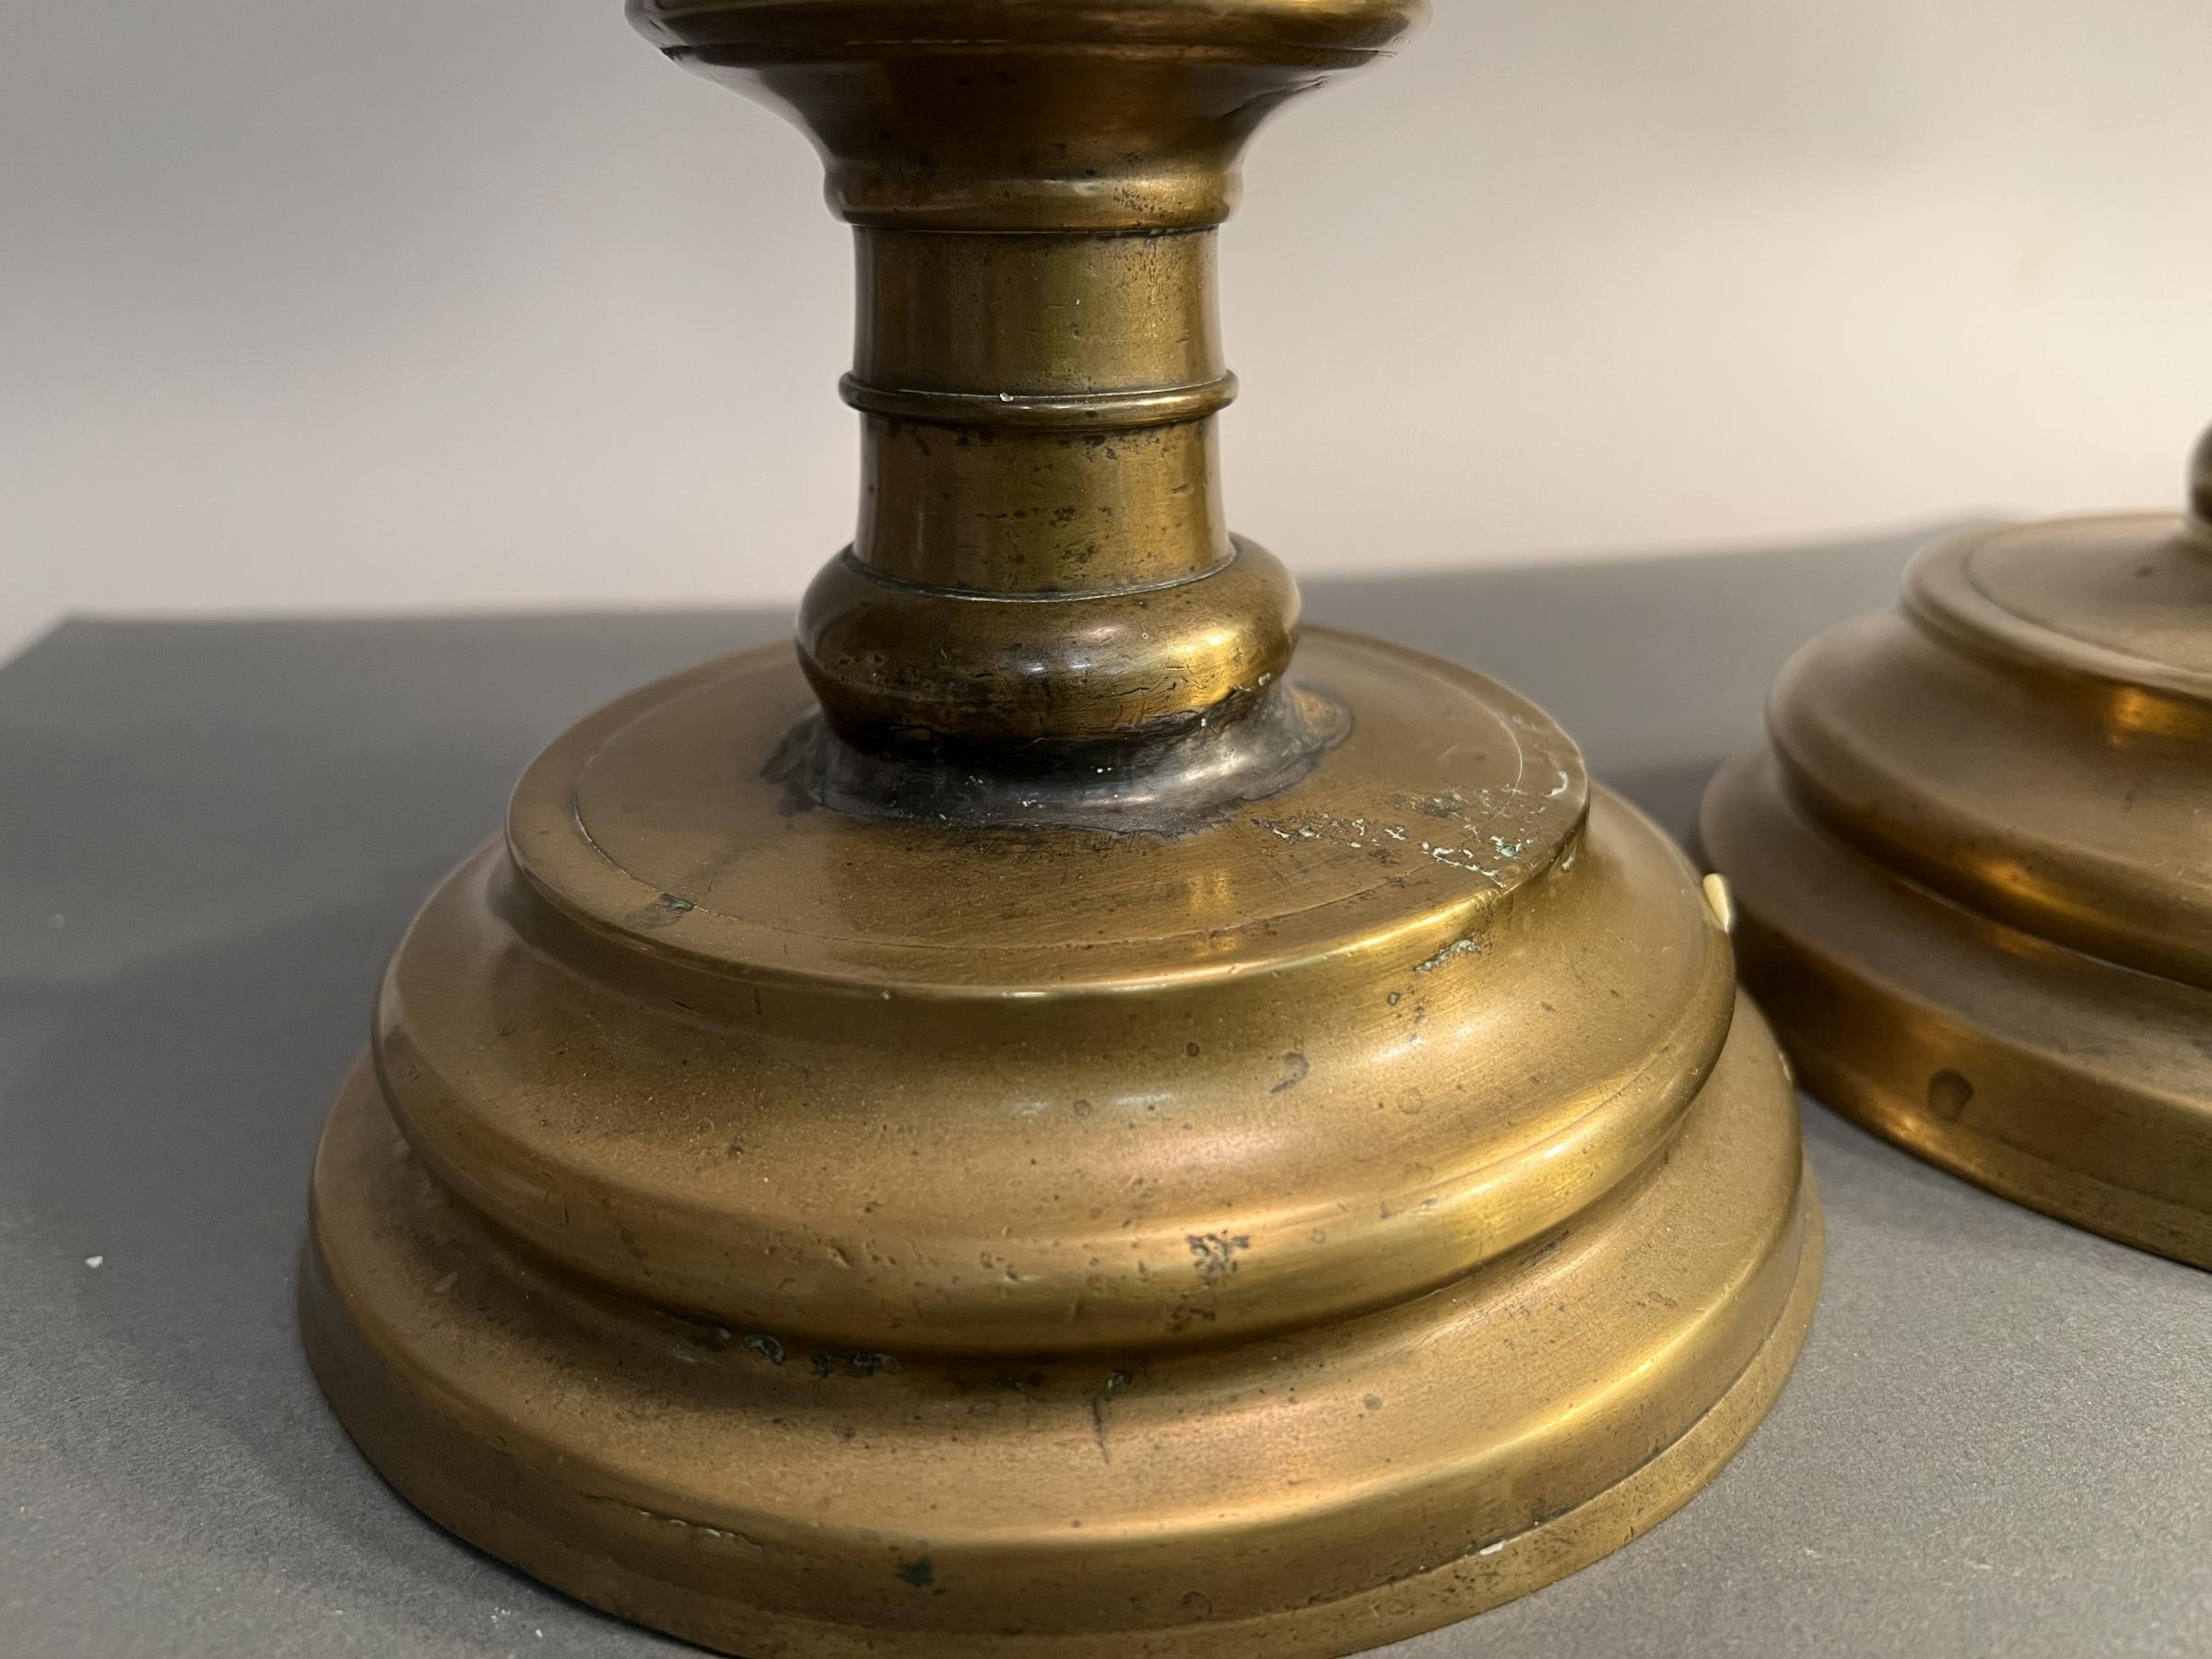 Pair of North European Gothic Turned Brass Pricket Altar Sticks, 15th/early 16th century